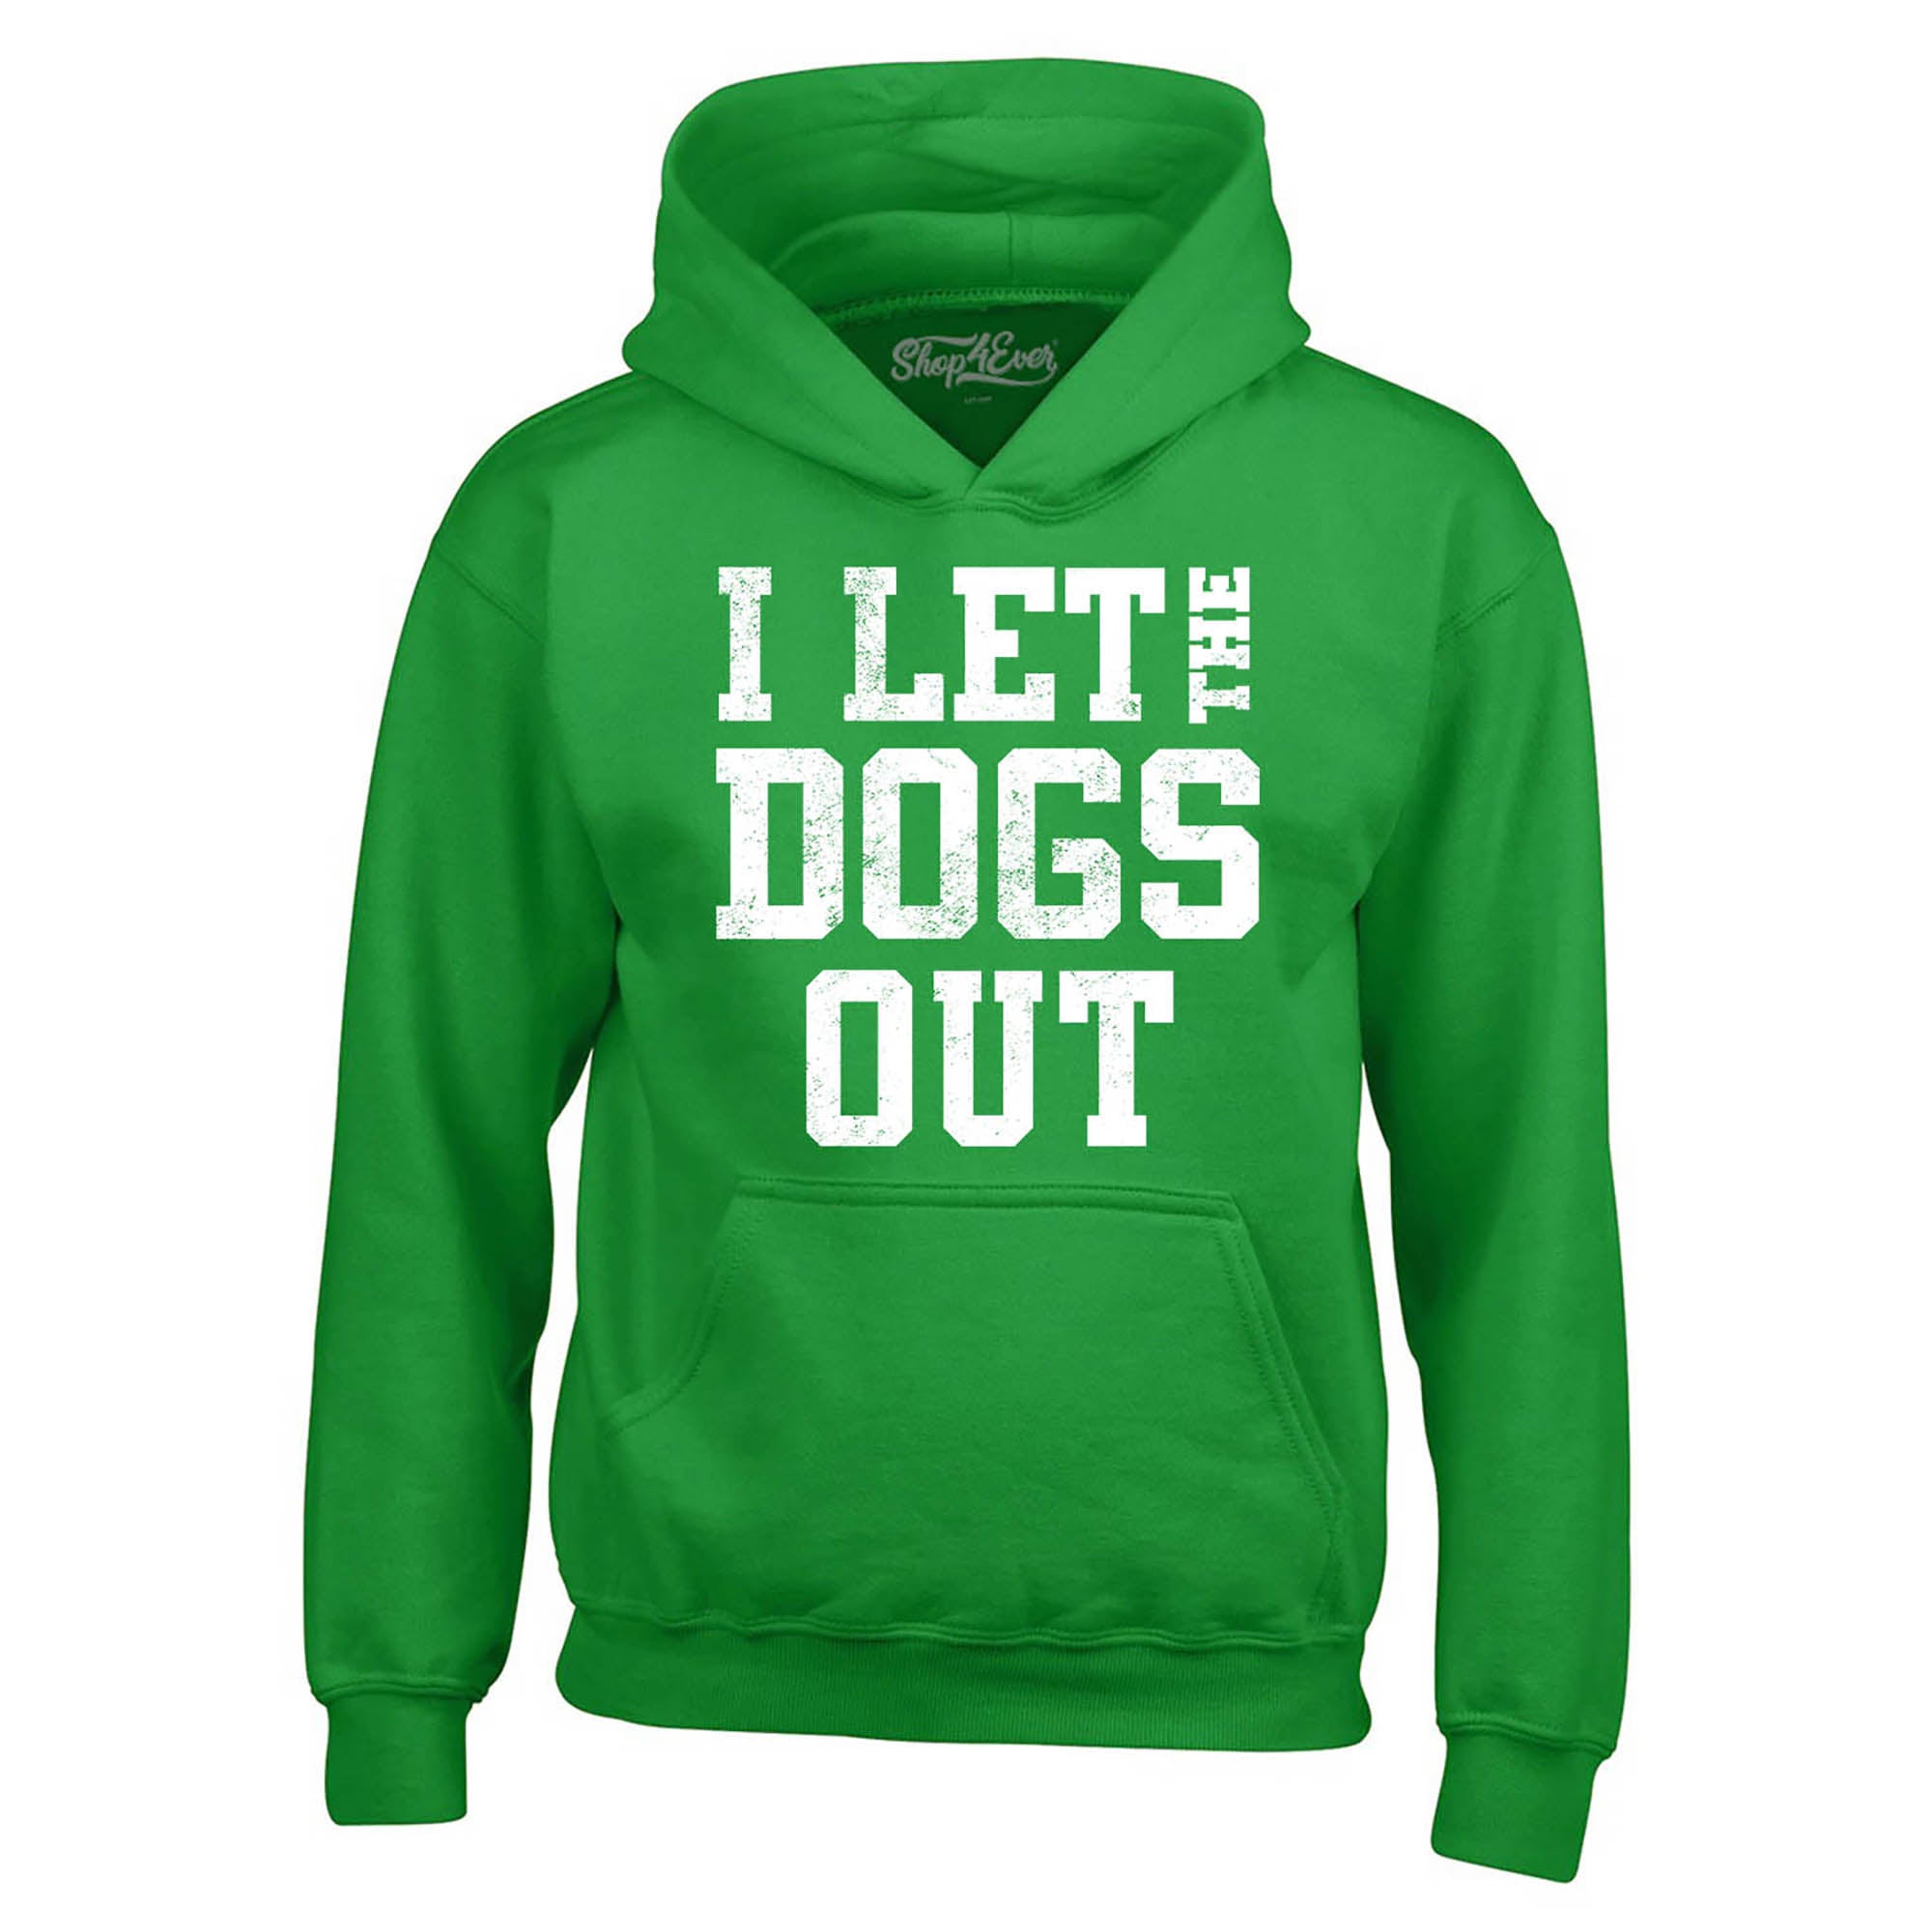 I Let the Dogs Out Hoodie Sweatshirts